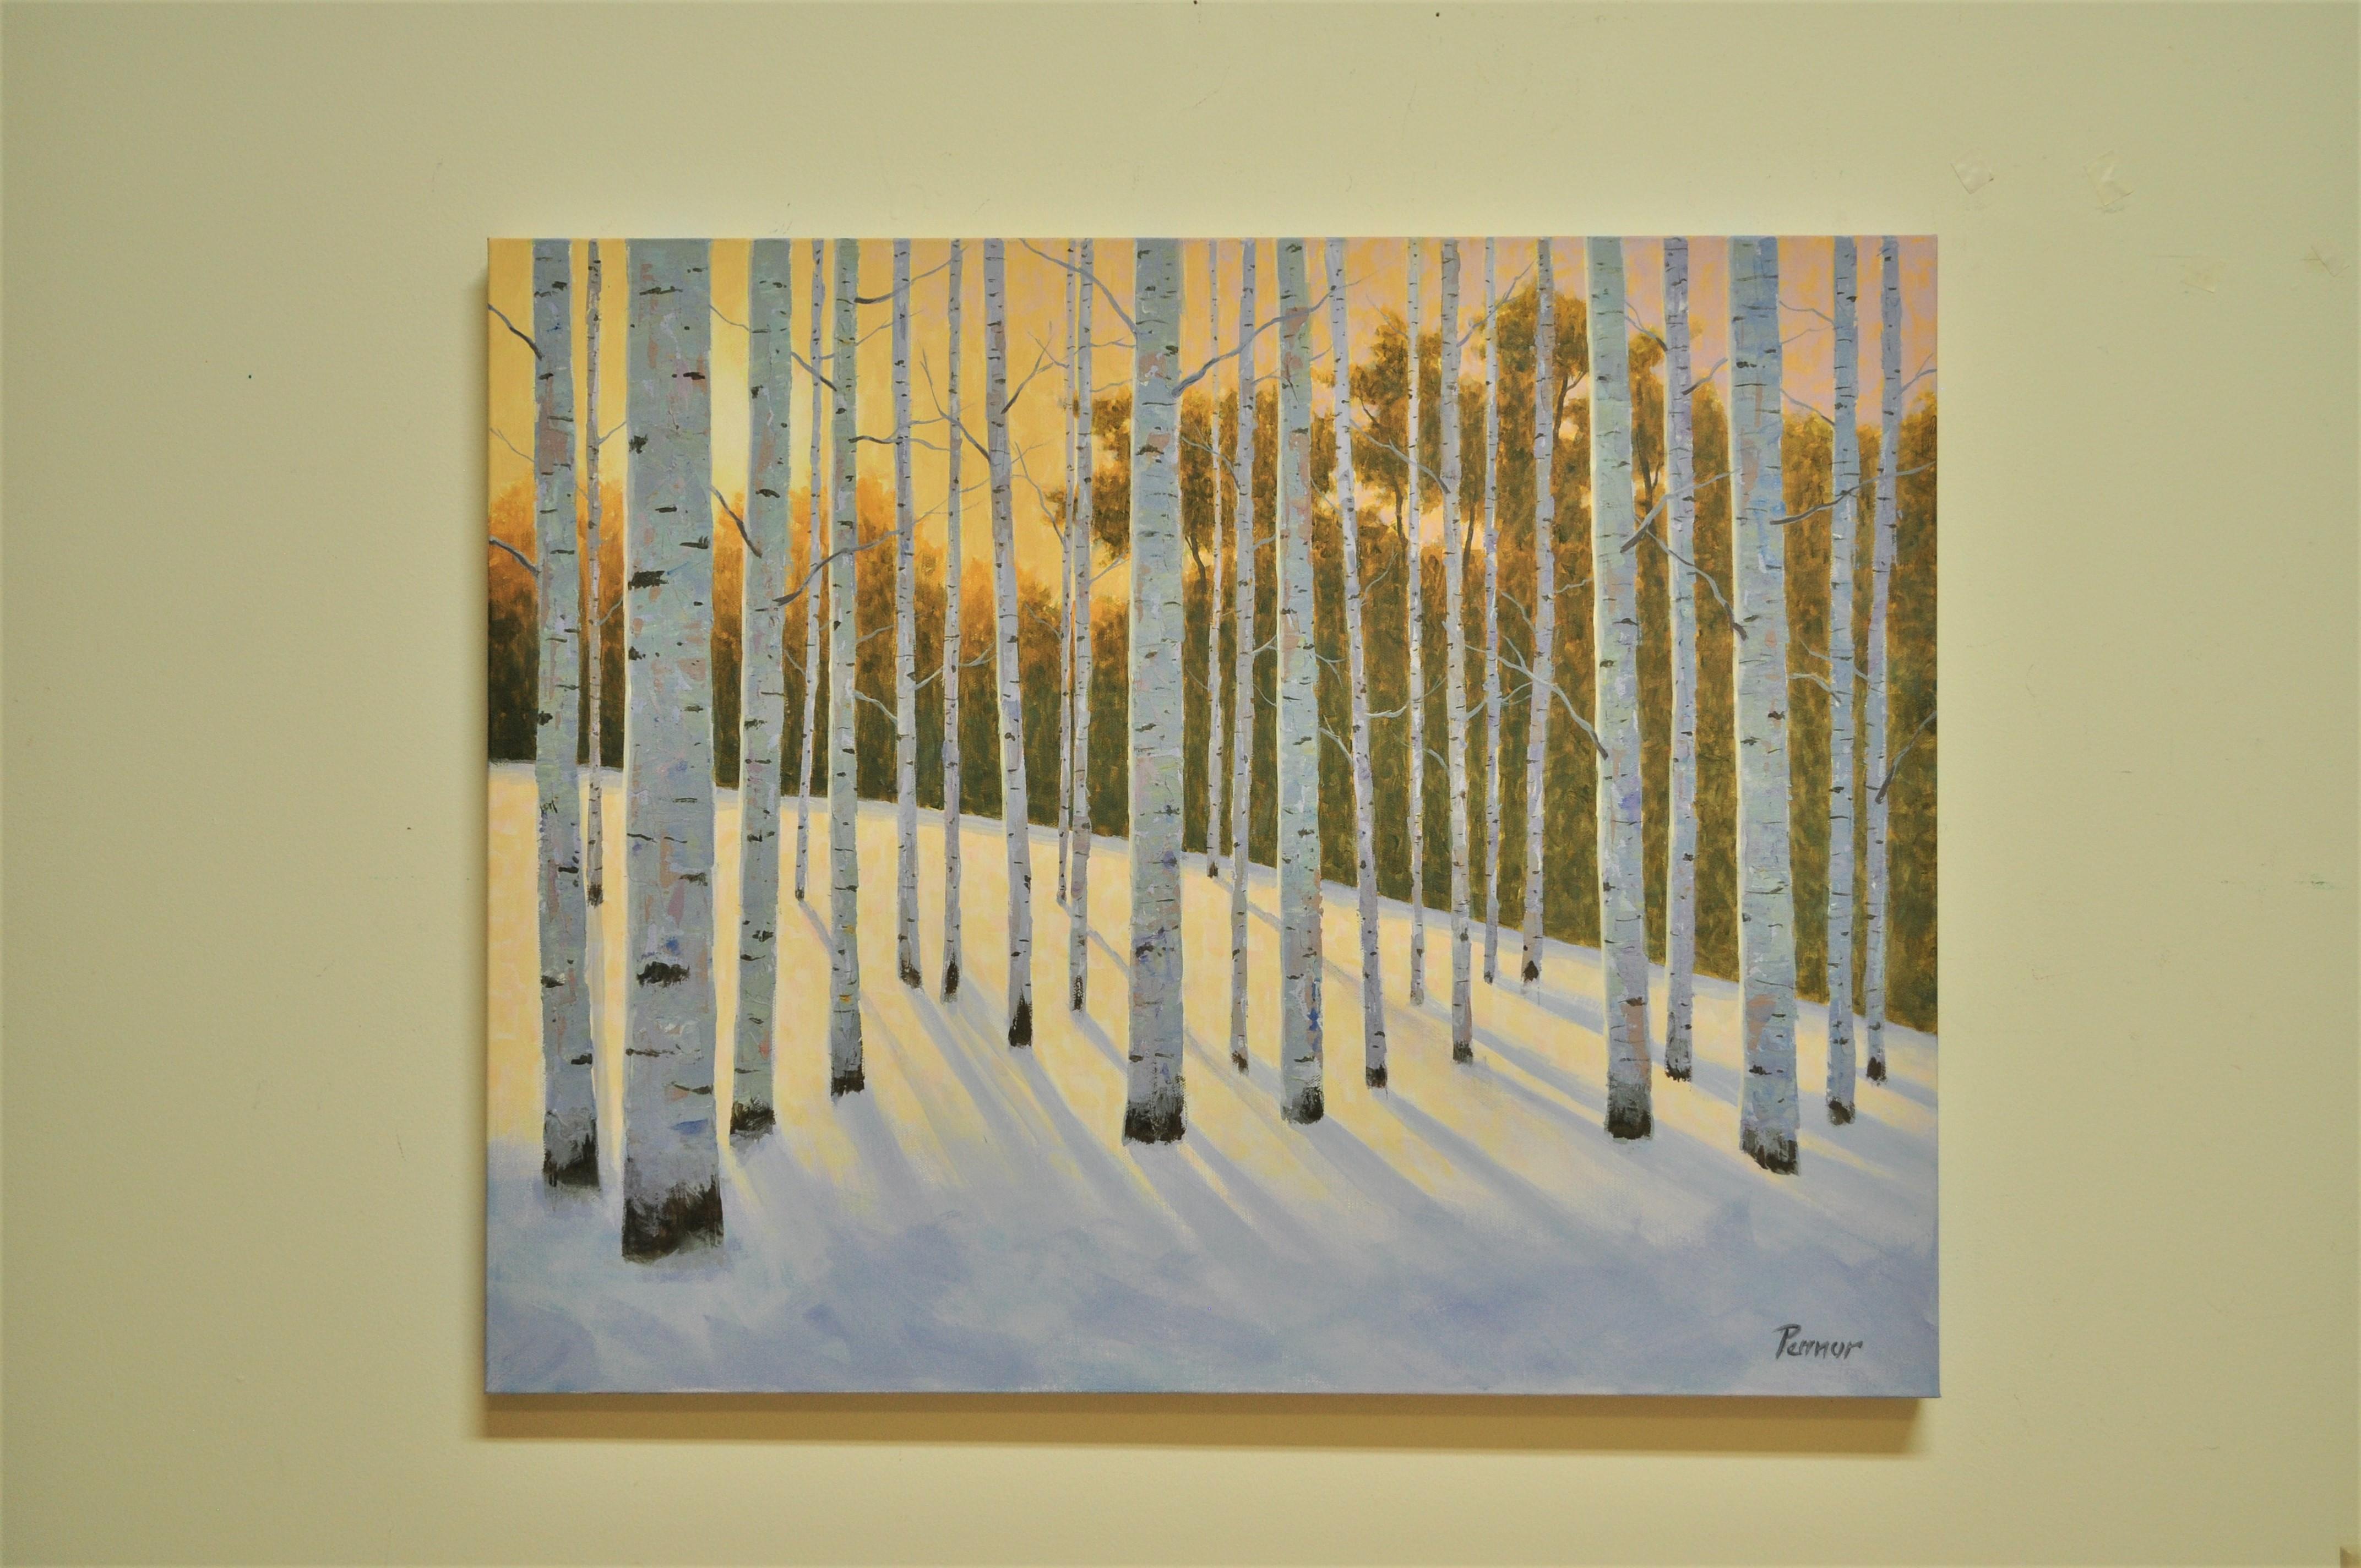 Sunset Aspens, Original Painting - Brown Landscape Painting by Robert Pennor